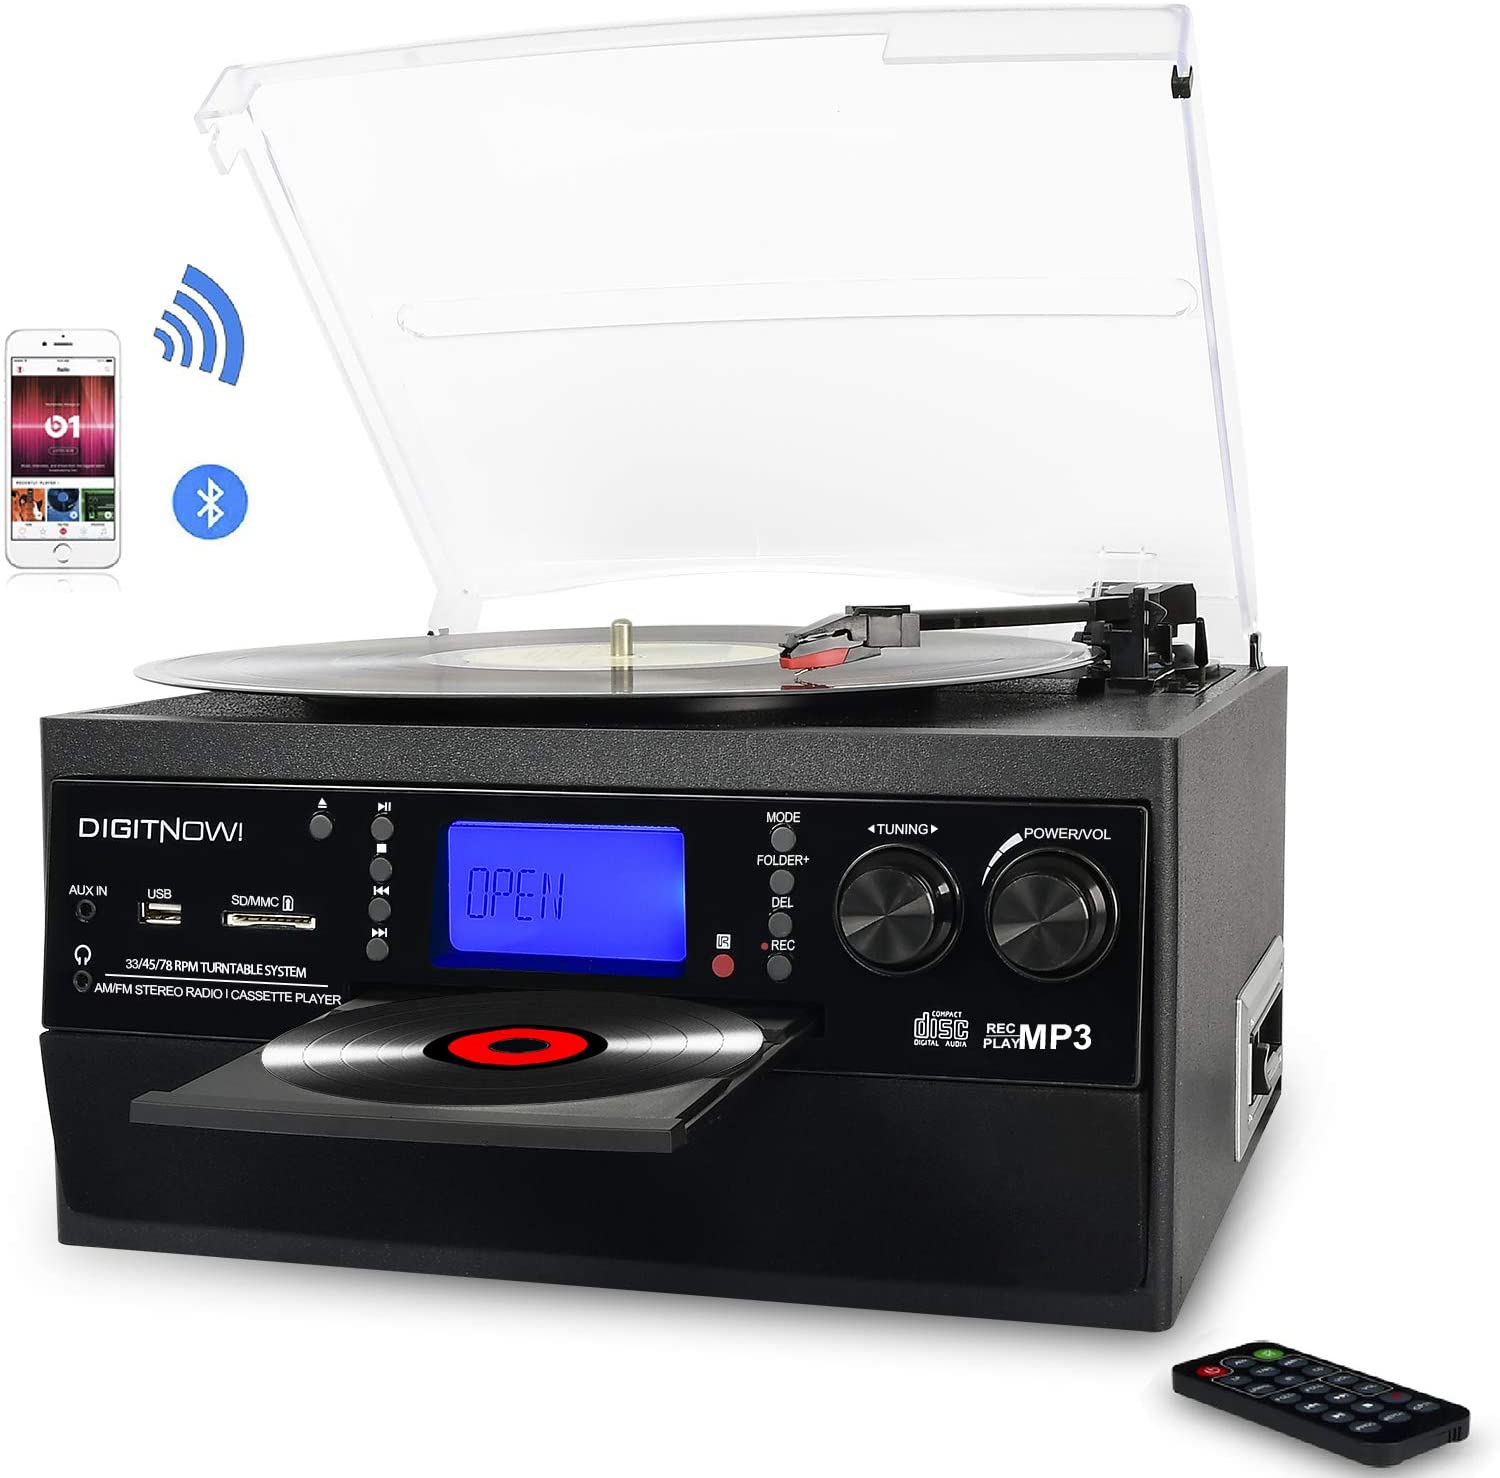 DIGITNOW Bluetooth Record Player Turntable with Stereo Speaker